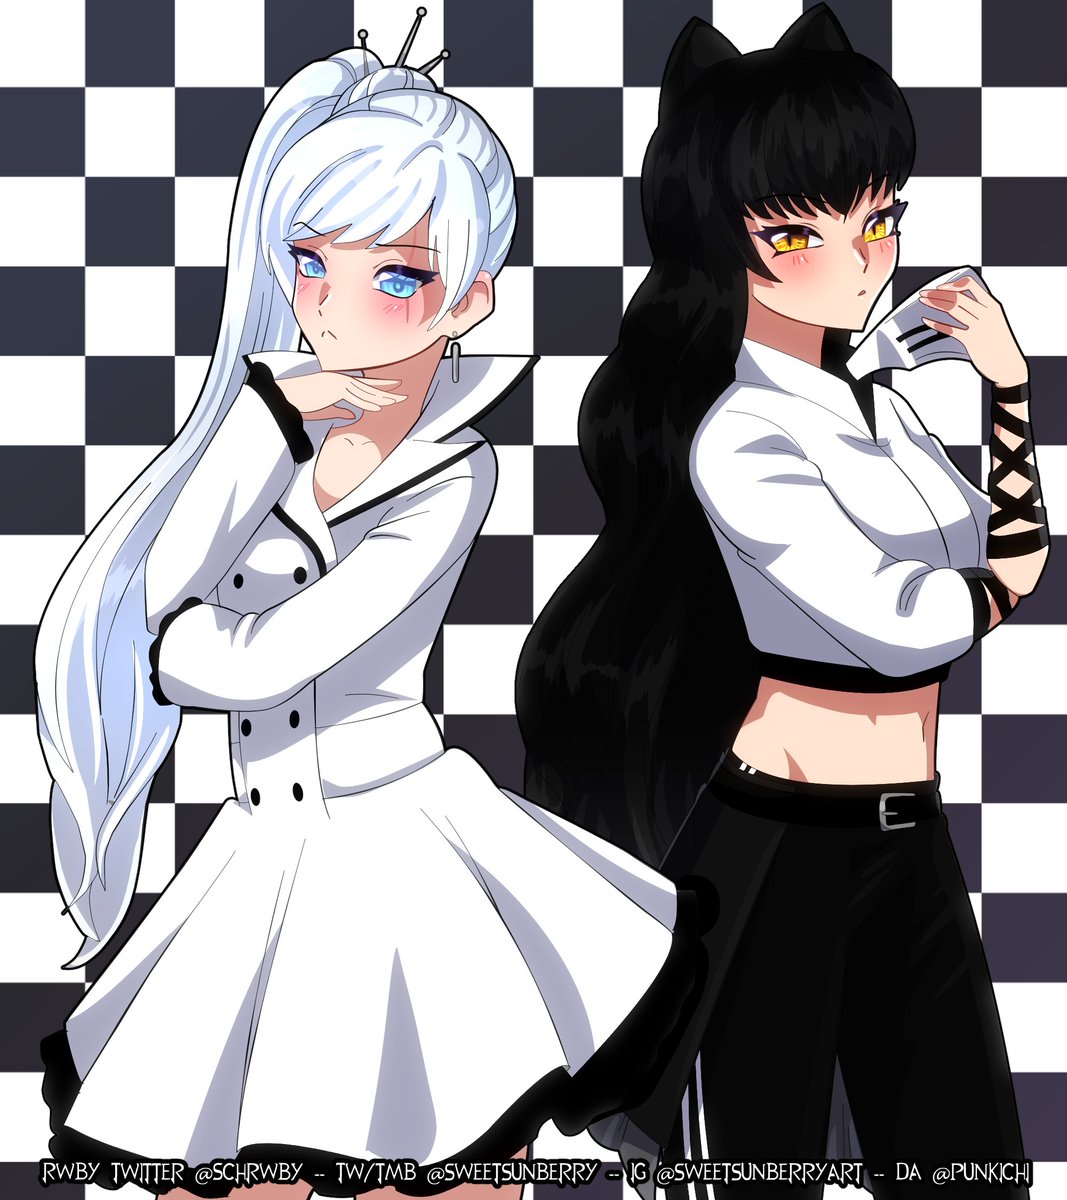 I so rarely draw team RWBY in their V2 outfits...!
Have Blake and Weiss!

#blakebelladonna #weissschnee
For more #RWBYfanart you can follow or check my pinned tweet for art c0mmissions, thank you!! #RWBY